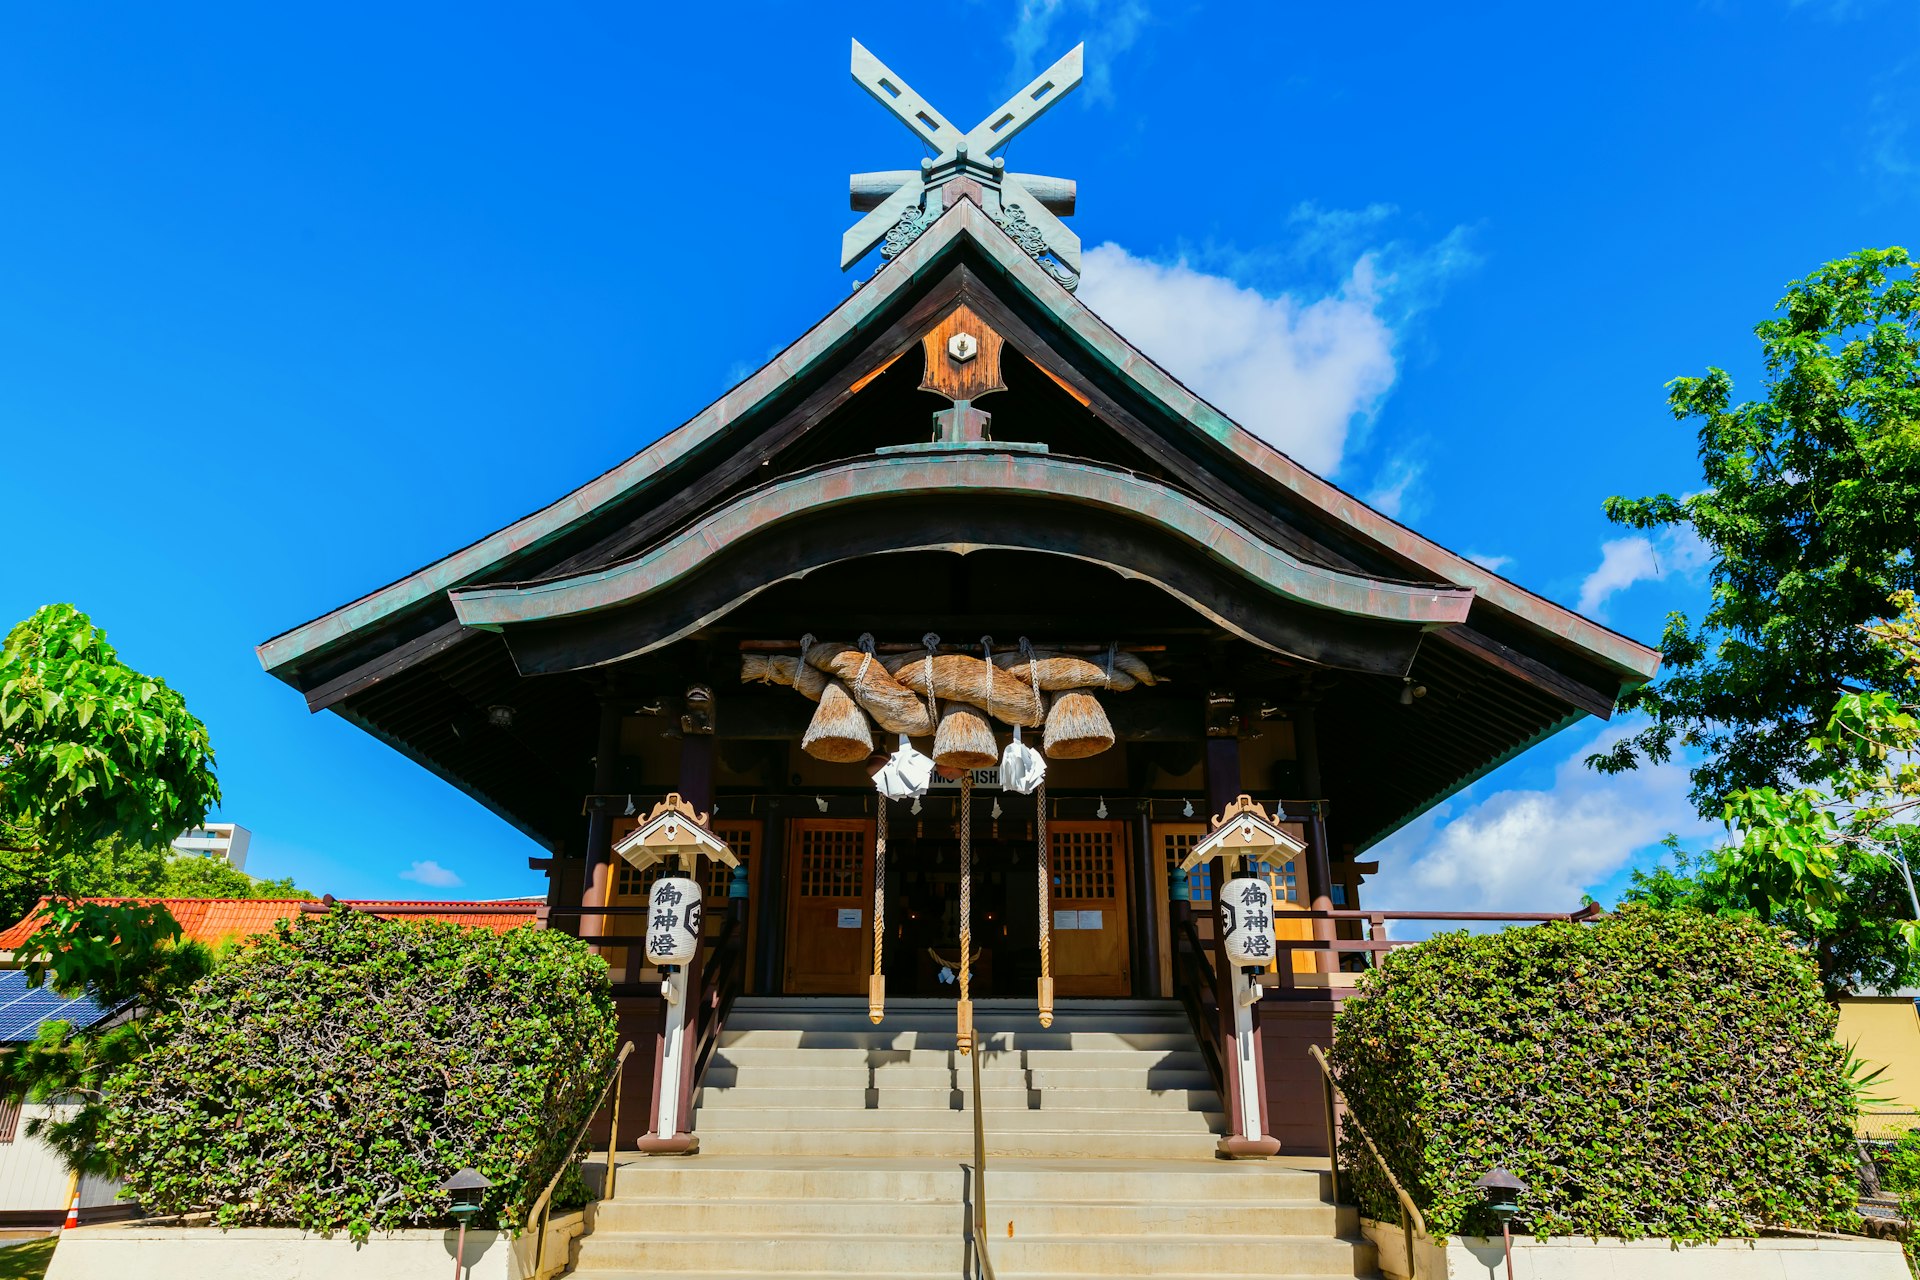 The steps up to a Japanese-style shrine with a pointed wooden roof